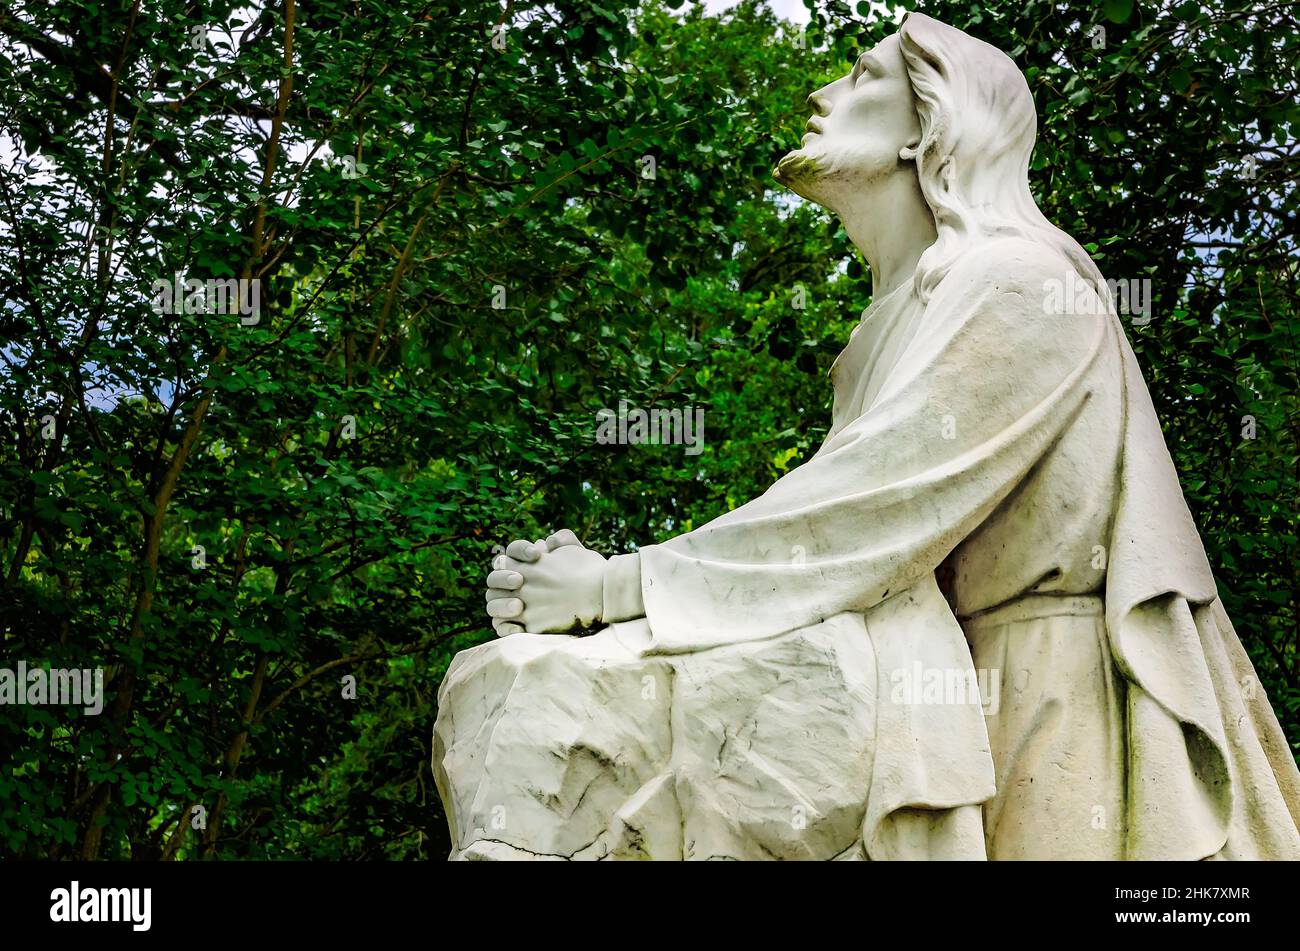 A statue of Jesus in the Garden of Gethsemane is pictured at Memory Hill Gardens, Aug. 24, 2019, in Tuscaloosa, Alabama. Stock Photo